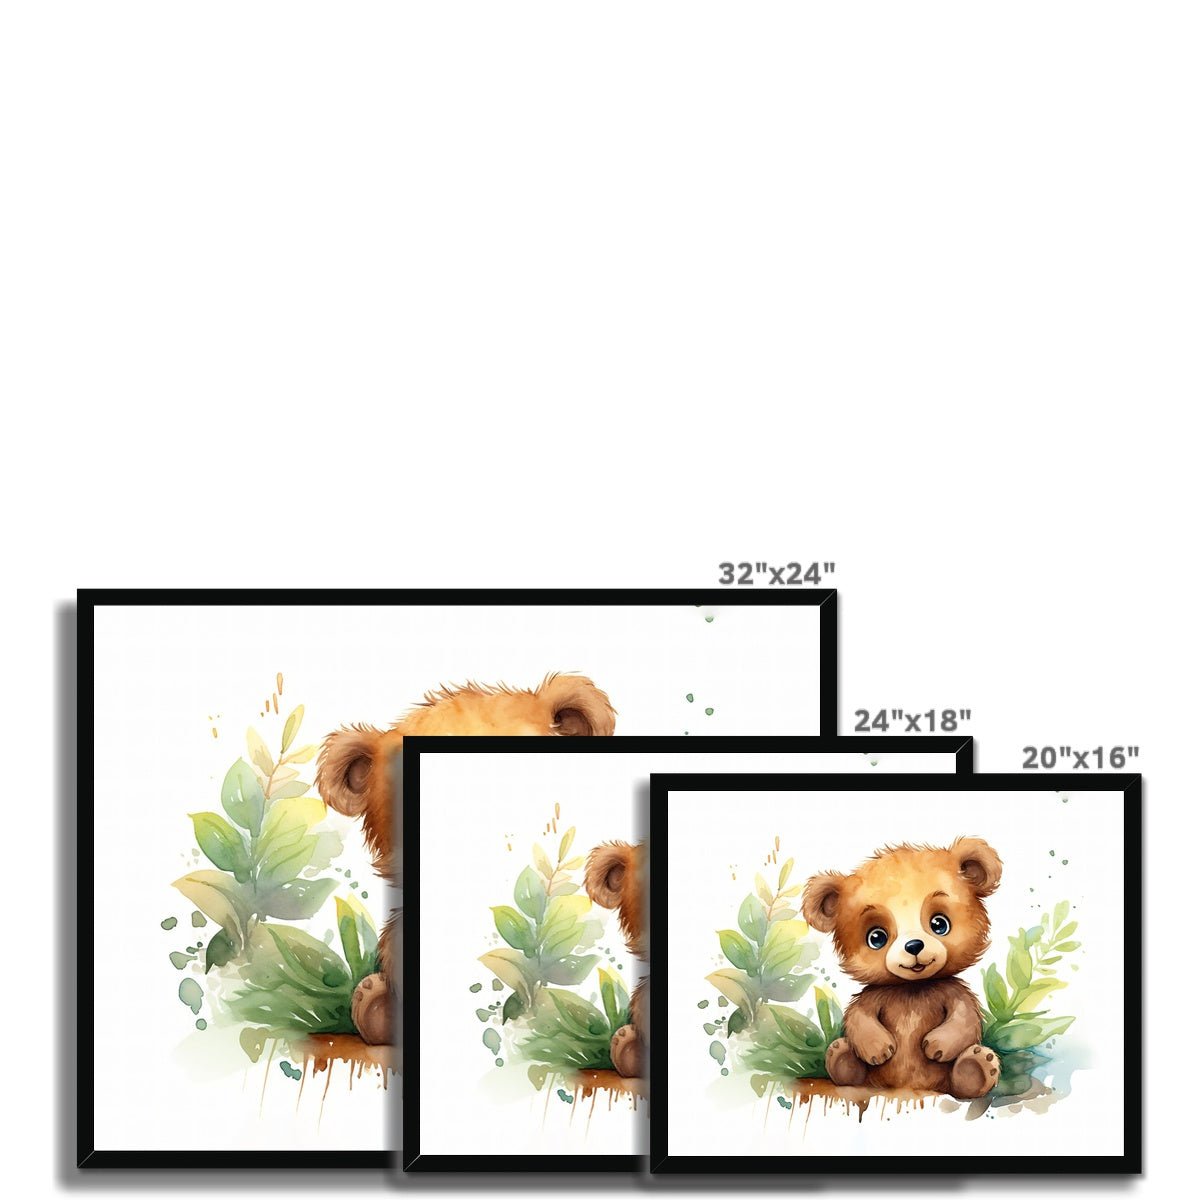 Jungle Baby Animals - Bear 5 - Animal Poster Print by doingly